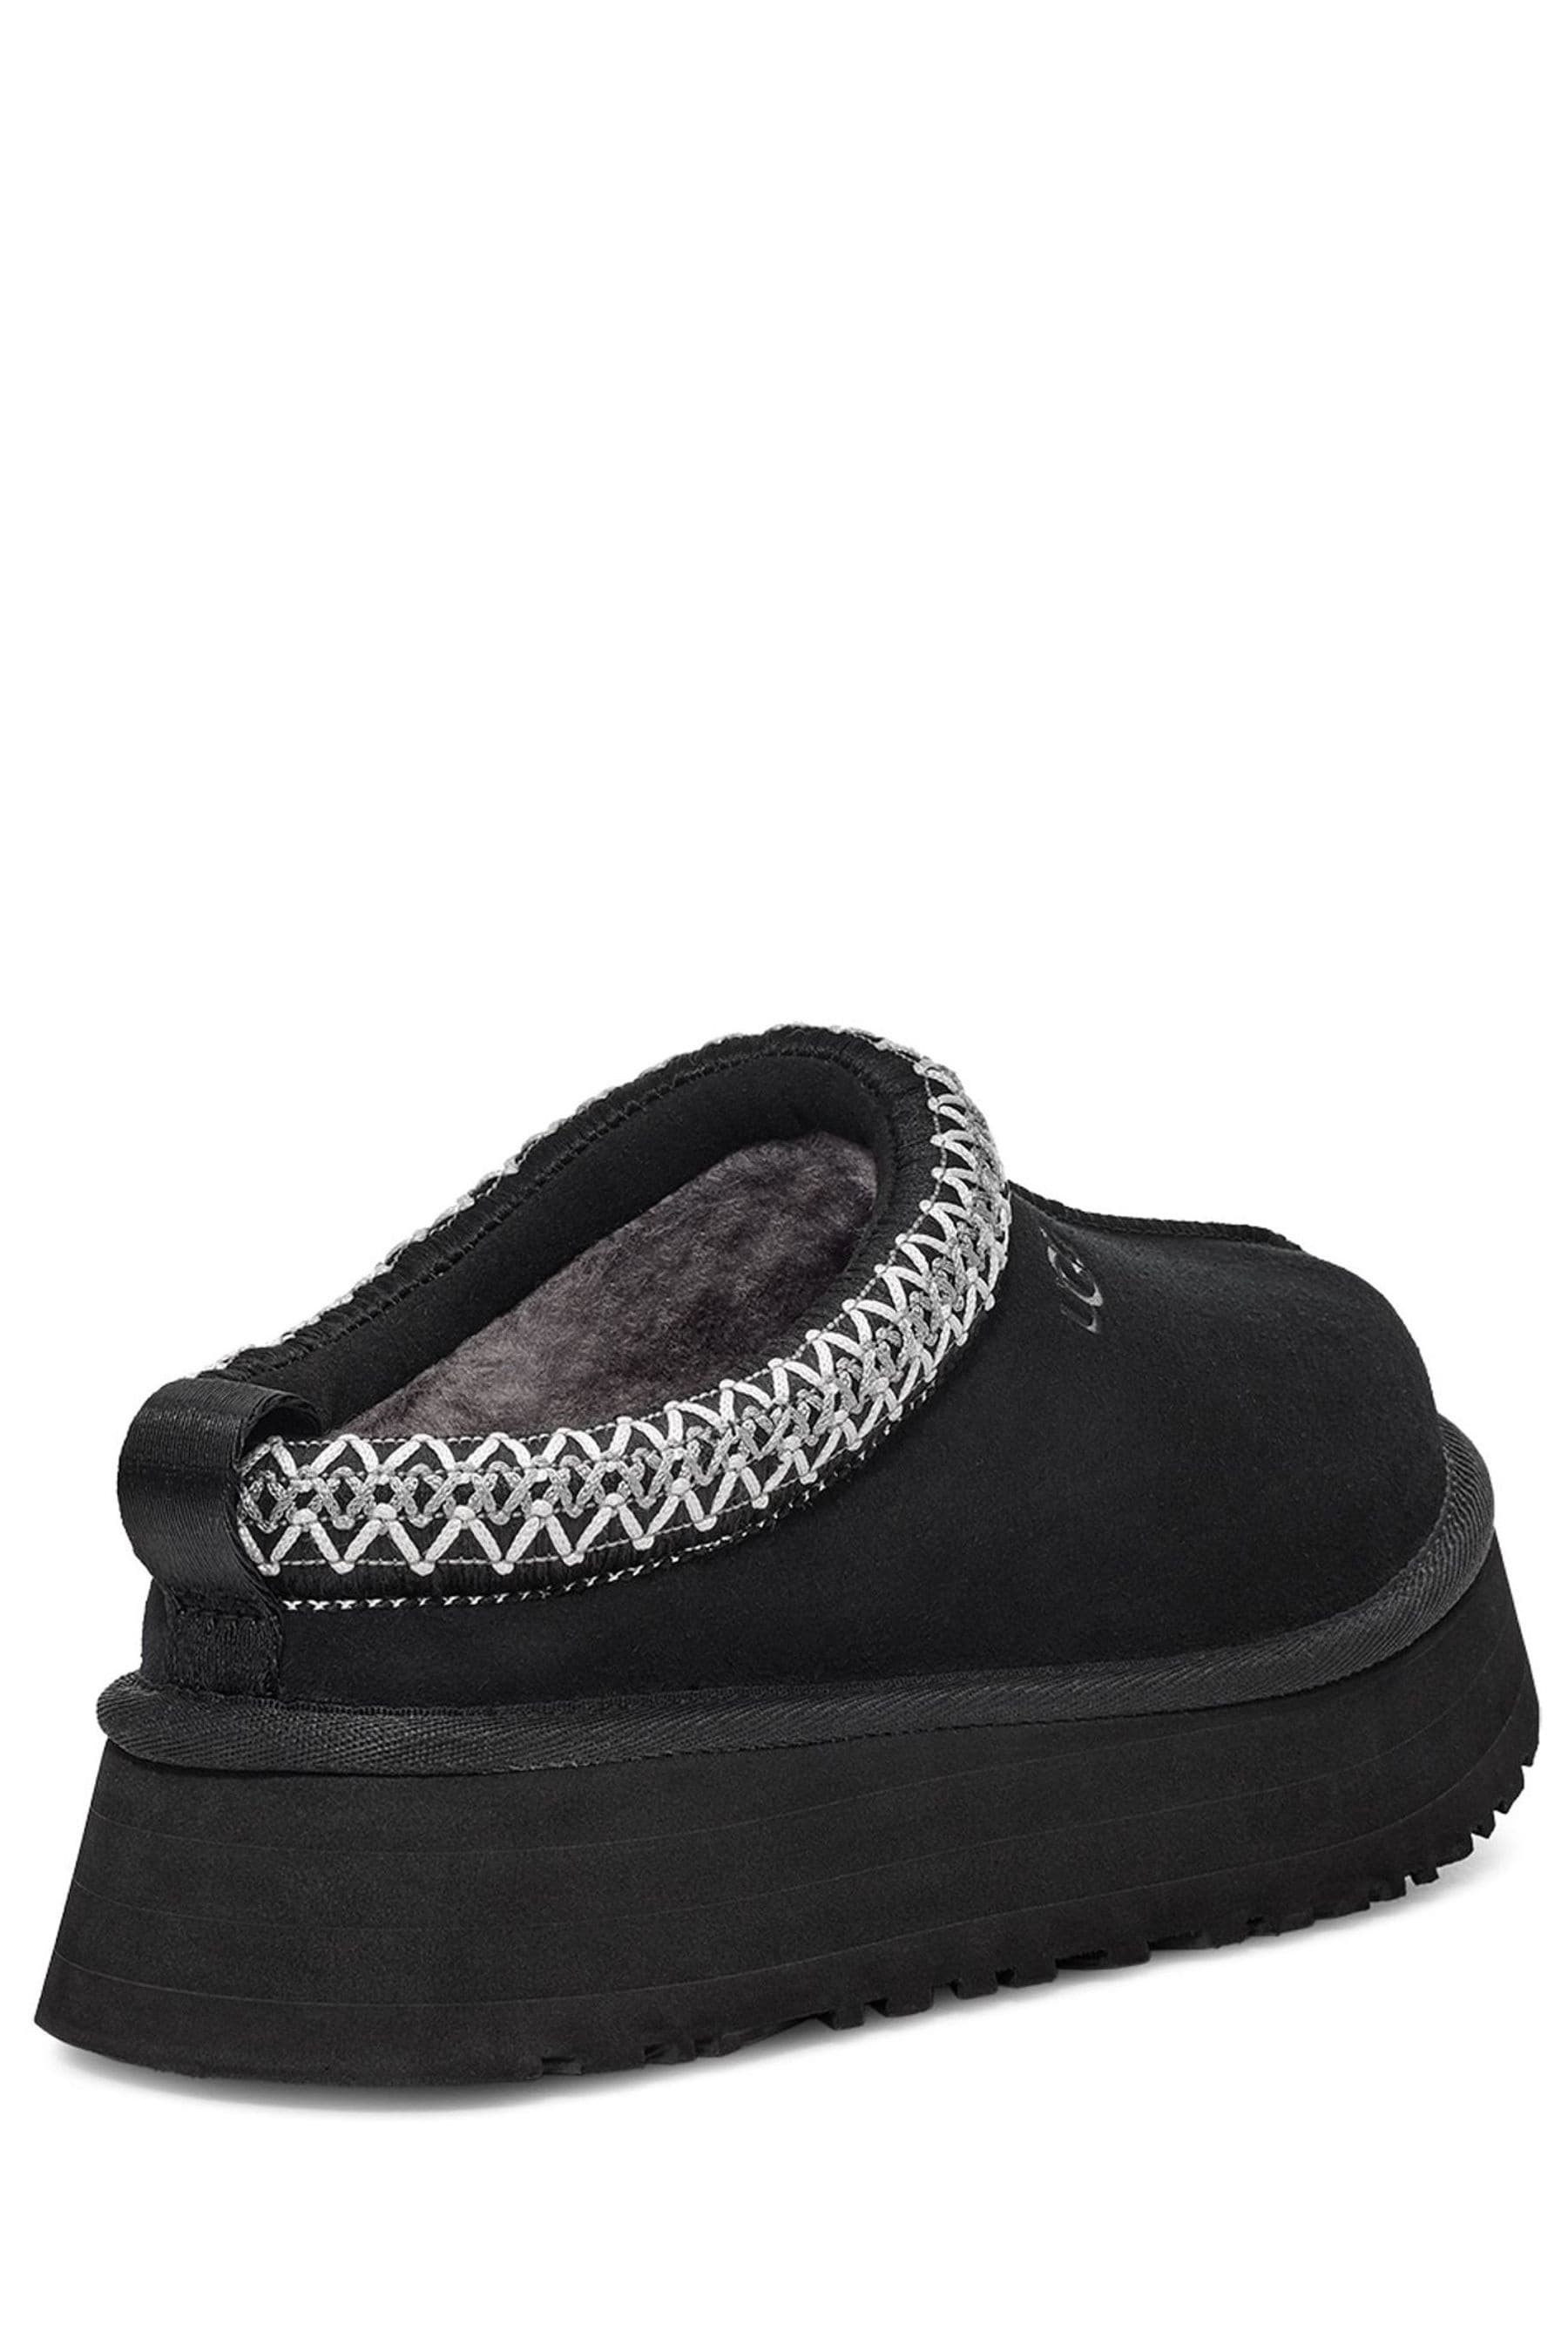 Buy UGG Tazz Slippers from the Next UK online shop